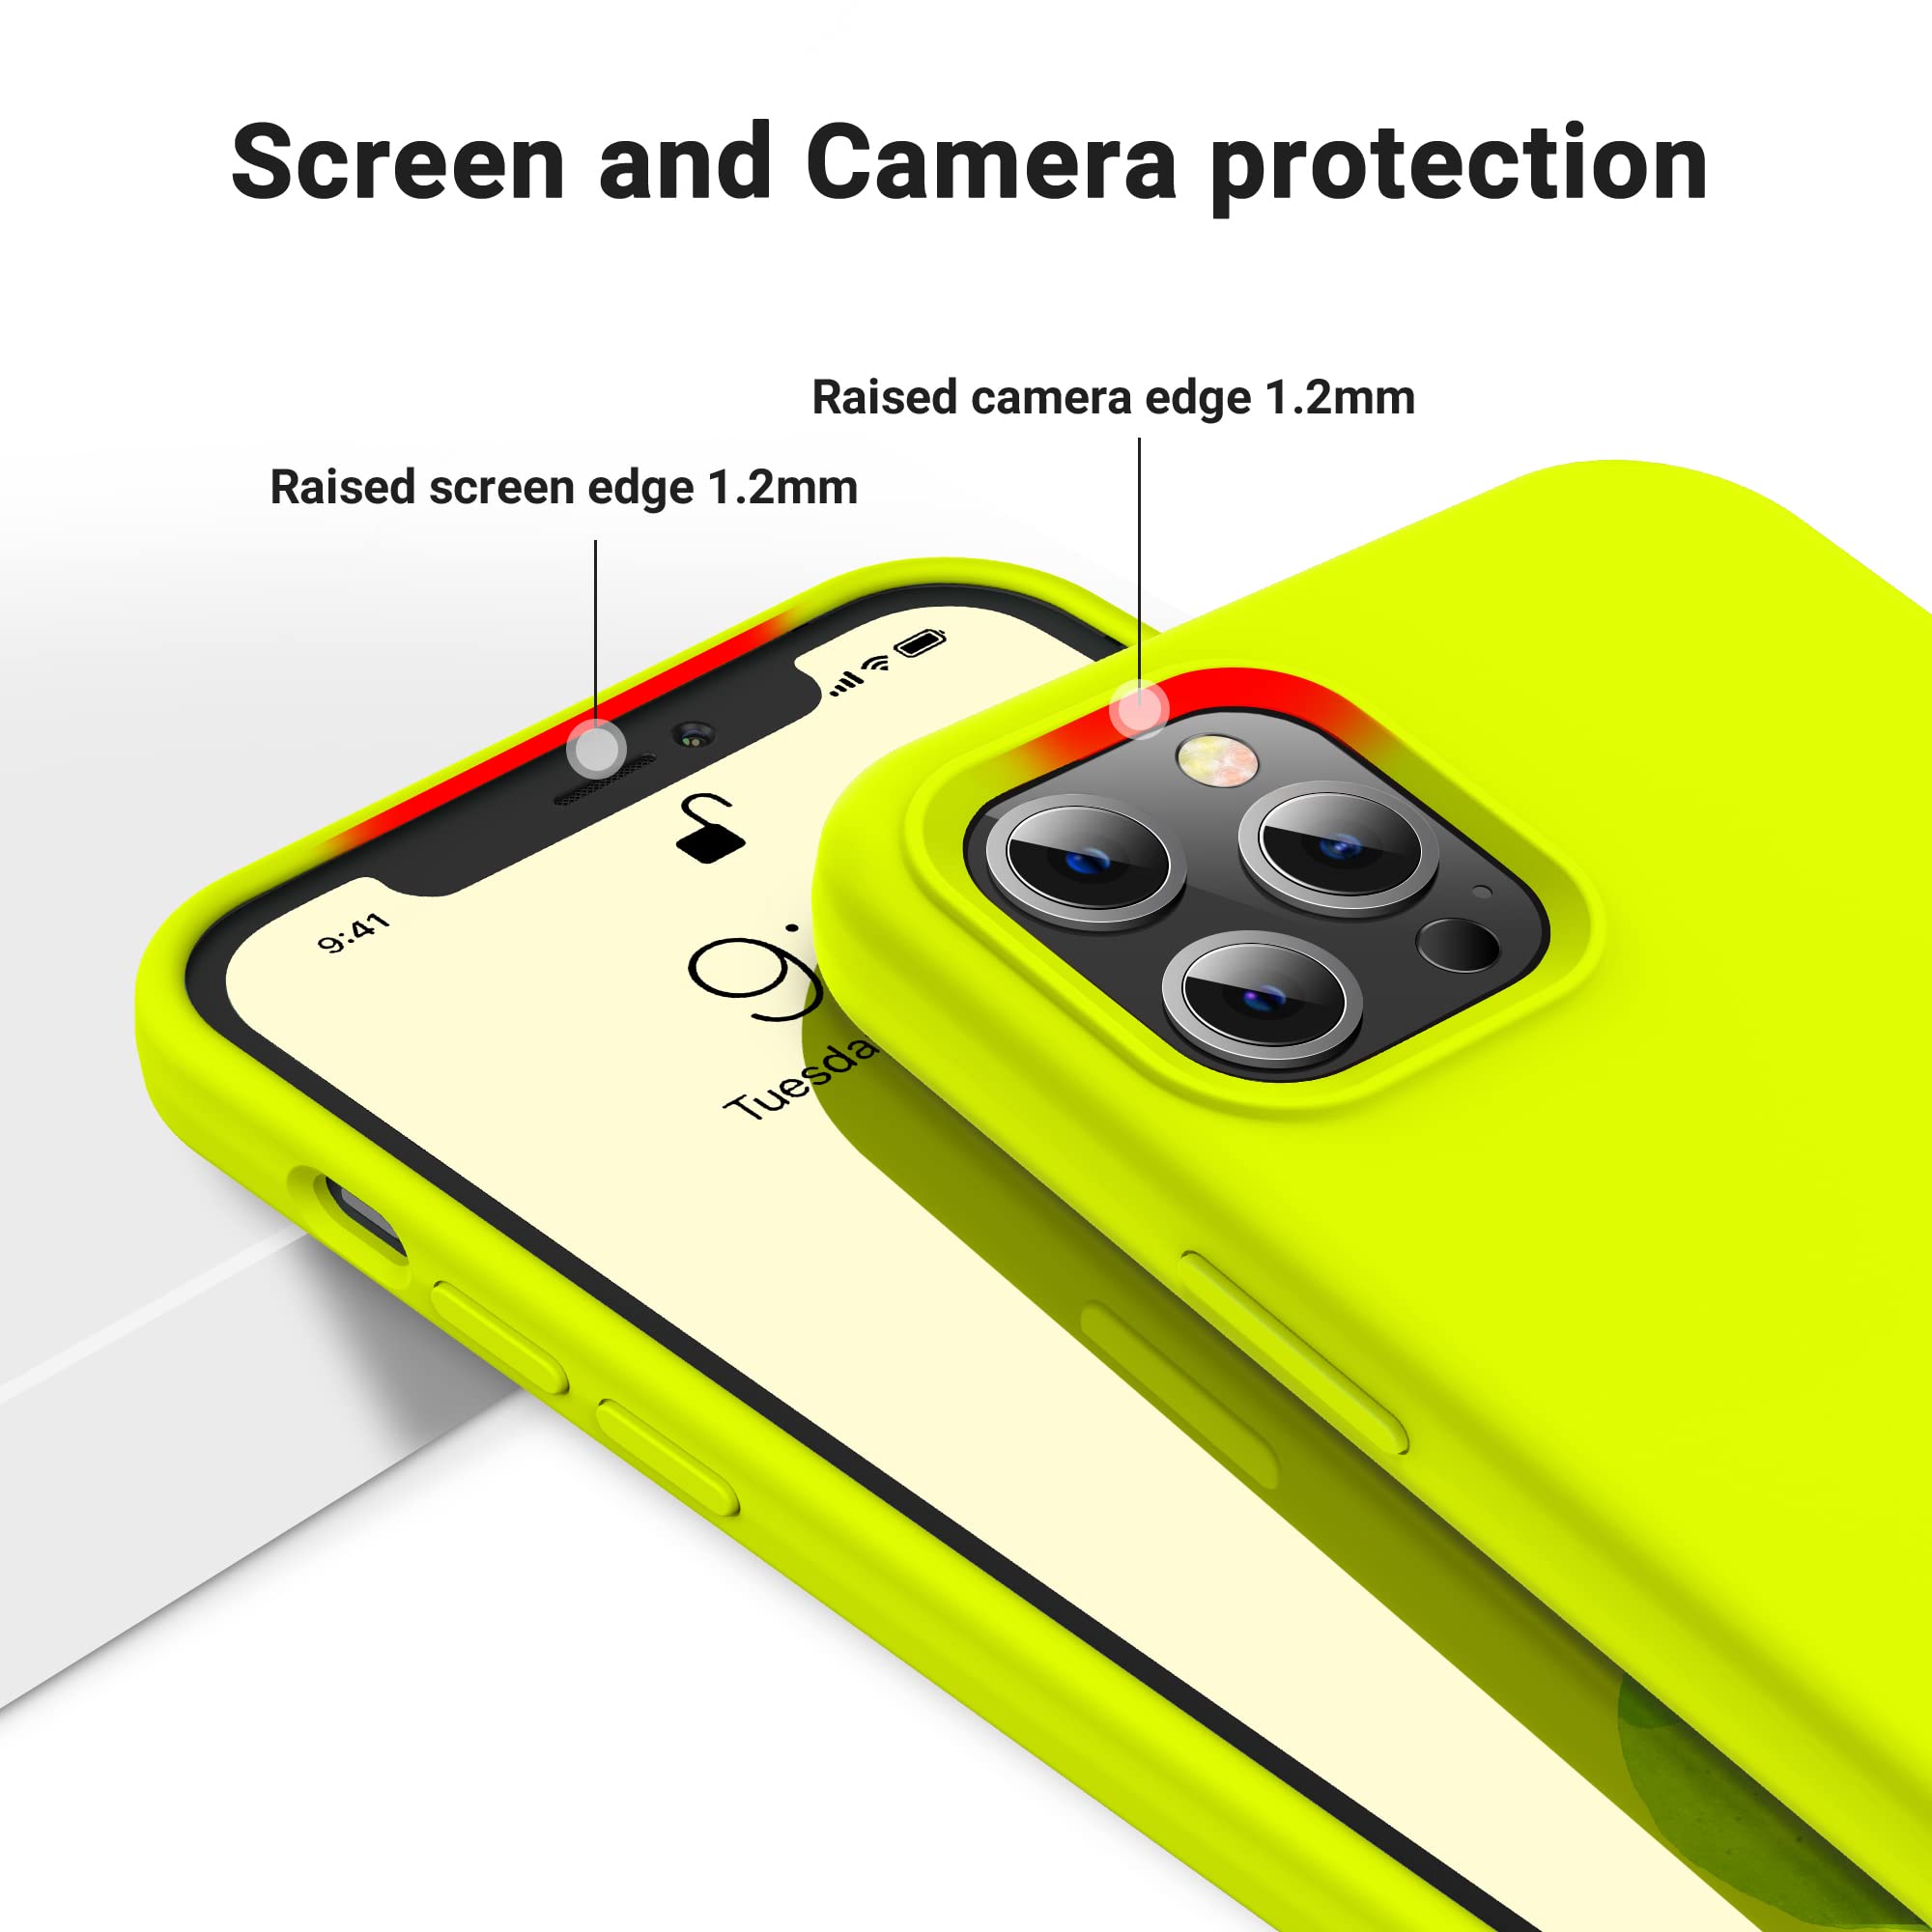 OTOFLY Compatible with iPhone 12 Pro Max Case 6.7 inch(2020),[Silky and Soft Touch Series]Premium Soft Liquid Silicone Rubber Full-Body Protective Bumper Case for iPhone 12 Pro Max(Fluorescent Yellow)